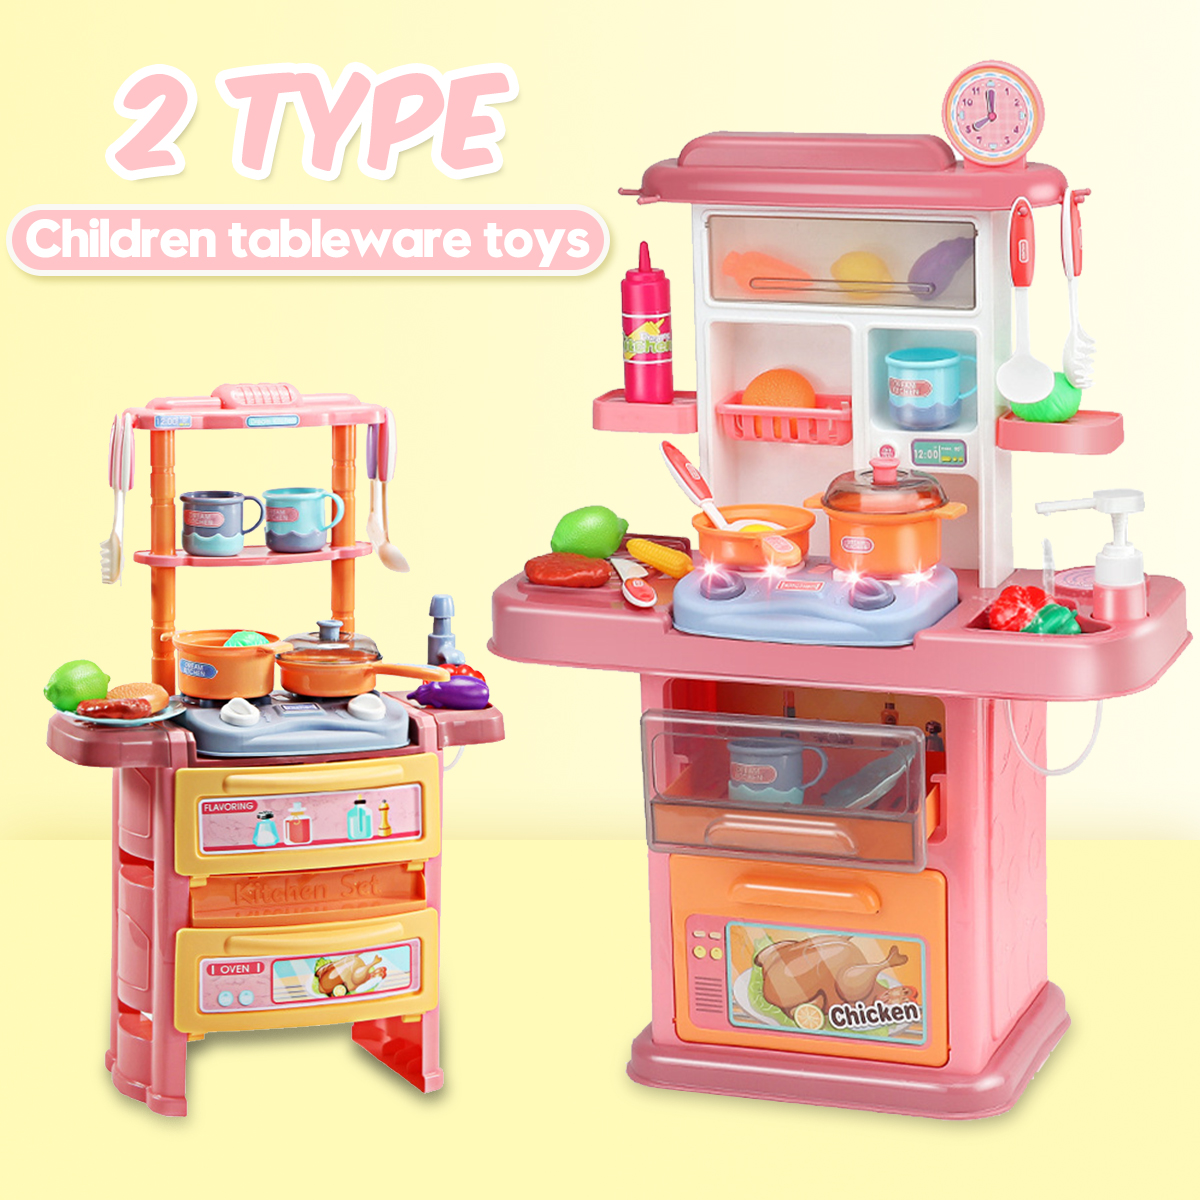 Dream-Kitchen-Role-Play-Cooking-Children-Tableware-Toys-Set-with-Sound-Light-Water-Outlet-Funtion-1678214-1